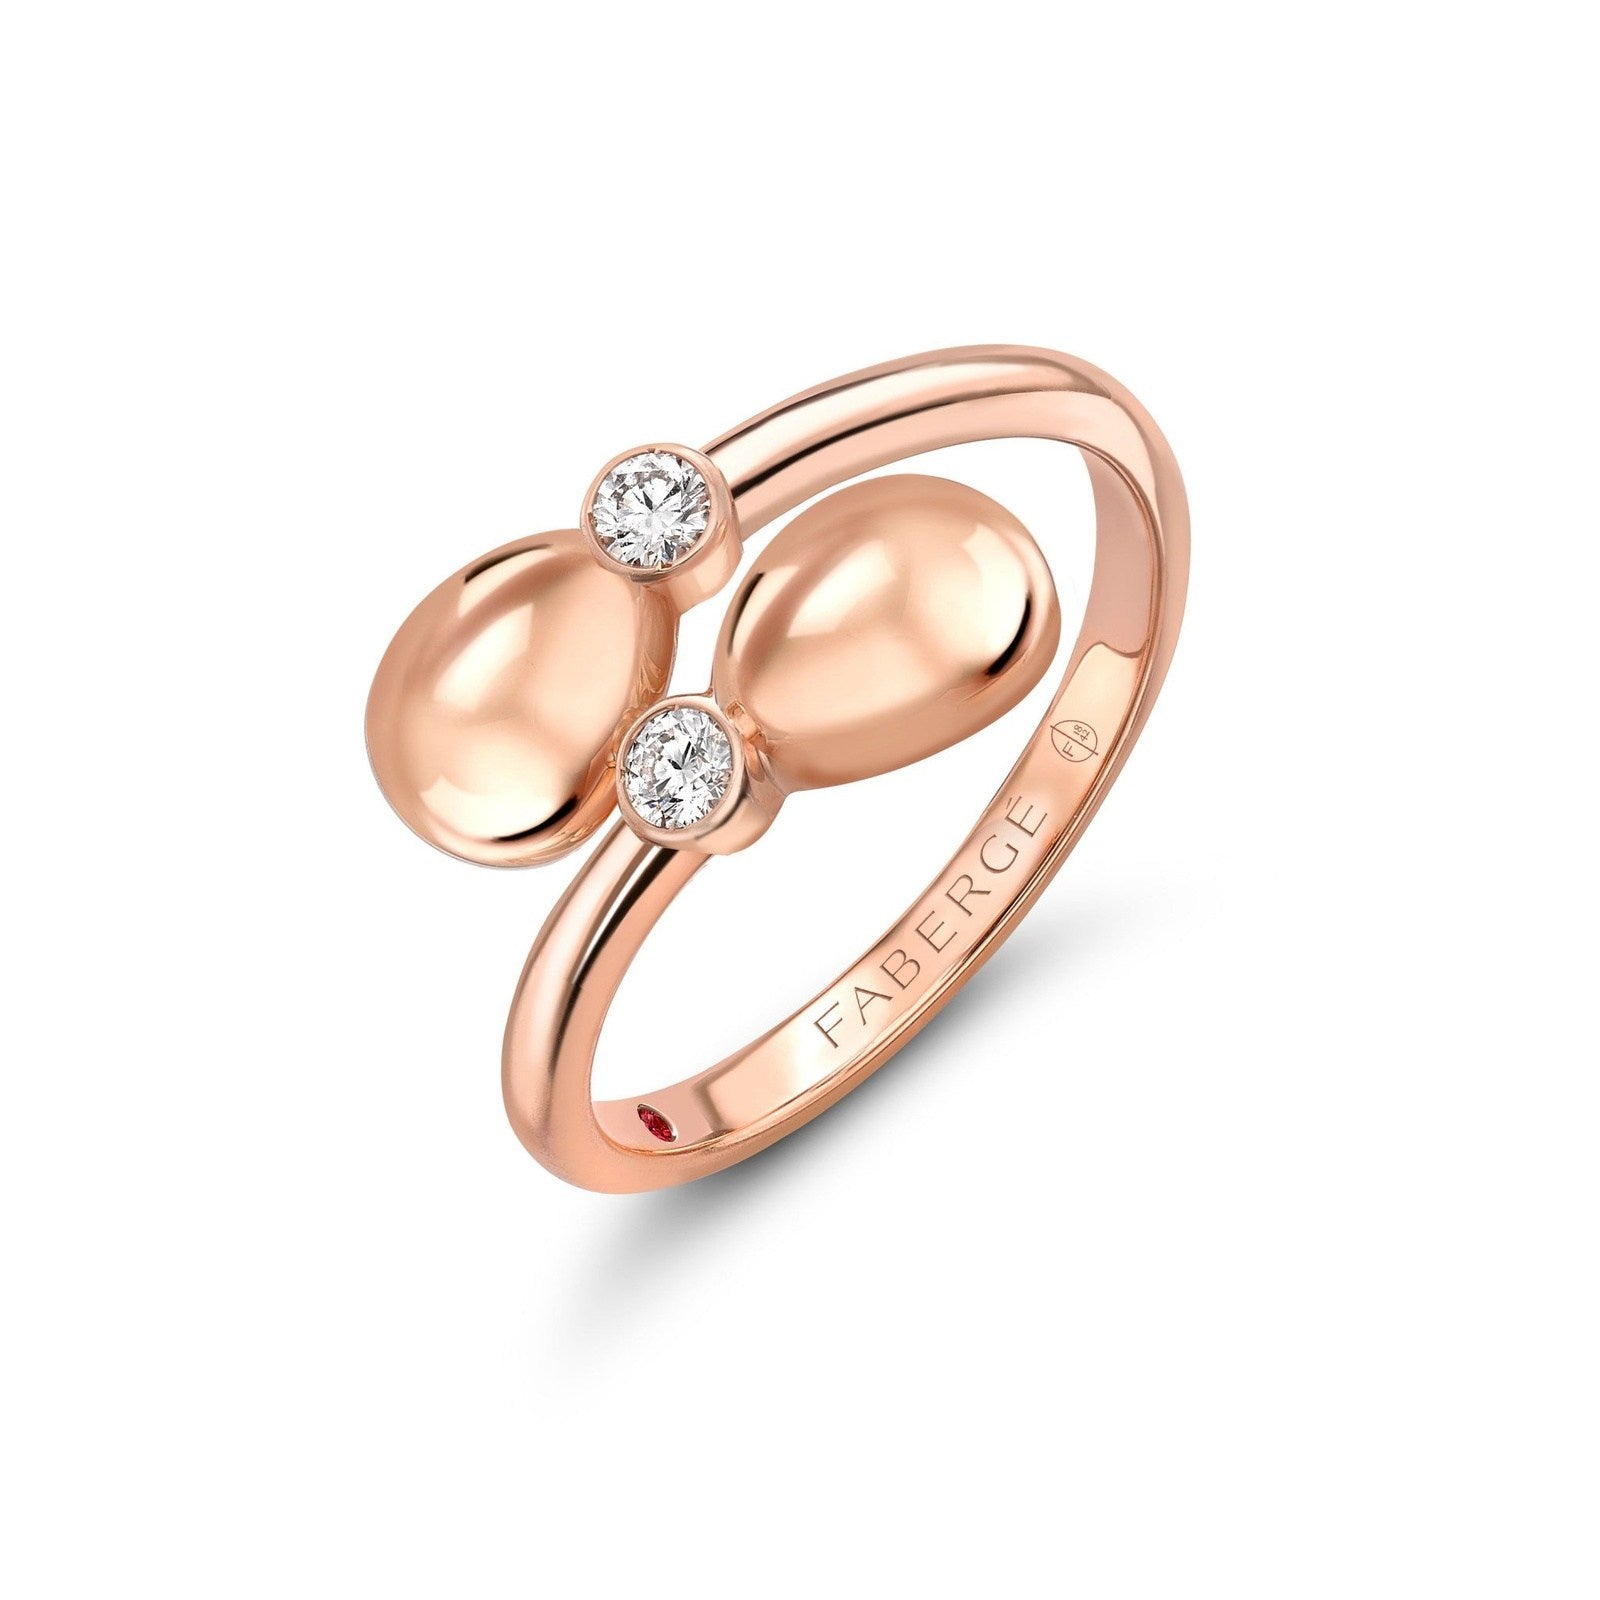 Faberge Essence Rose Gold Crossover Ring - 1120RG2076